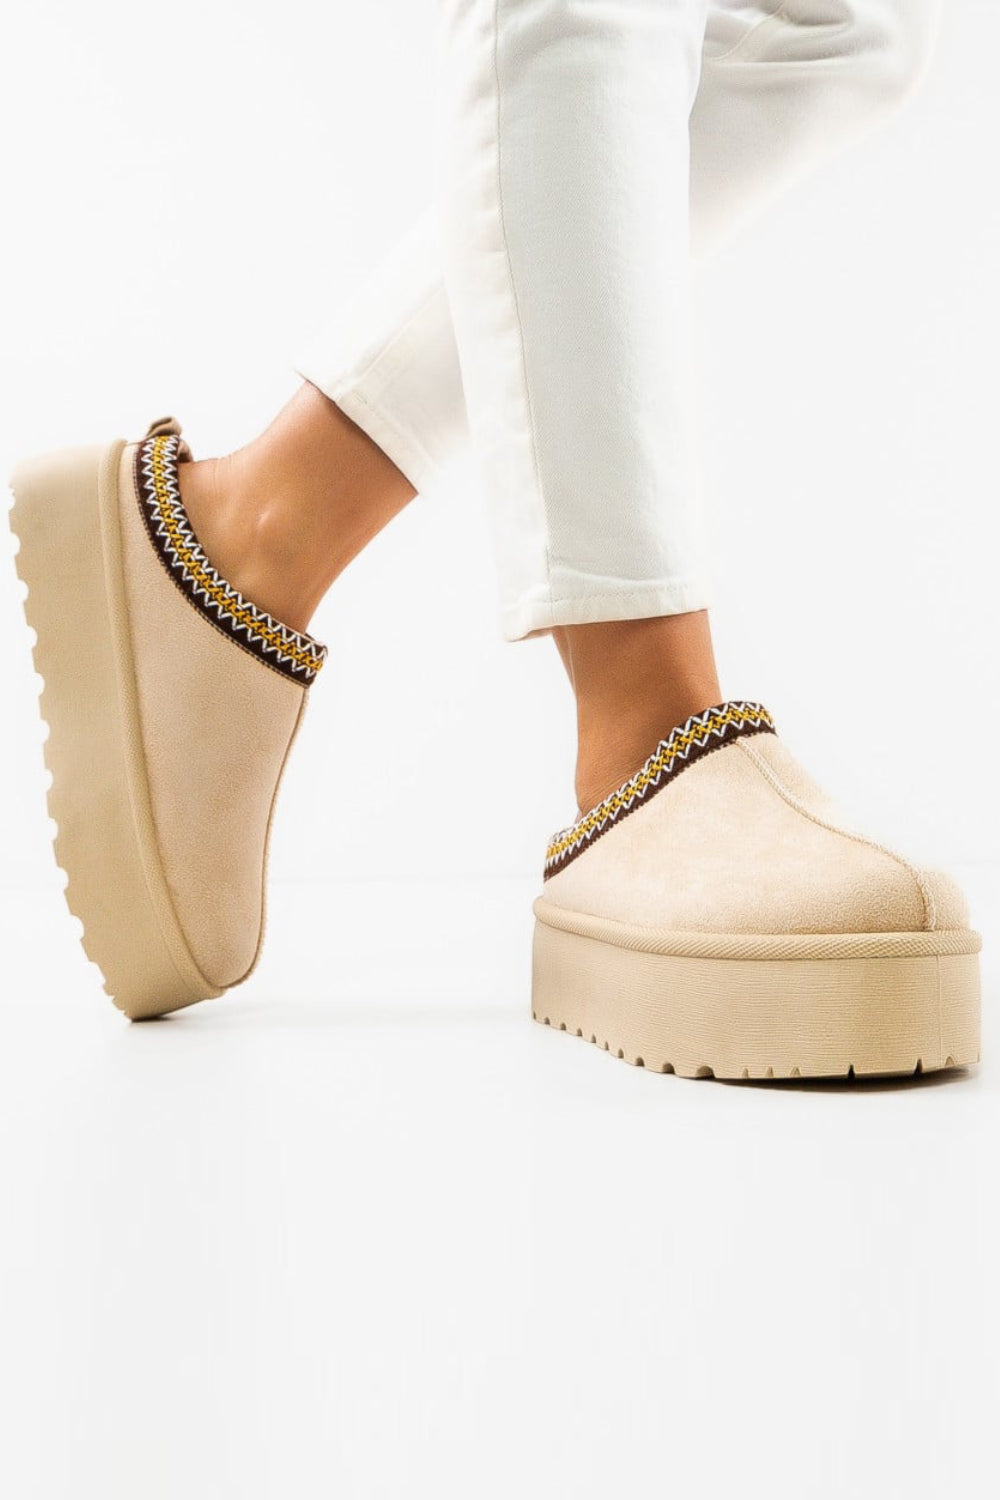 BEIGE FLUFFY PLATFORM SLIPPERS FAUX FUR LINED ANKLE BOOTS